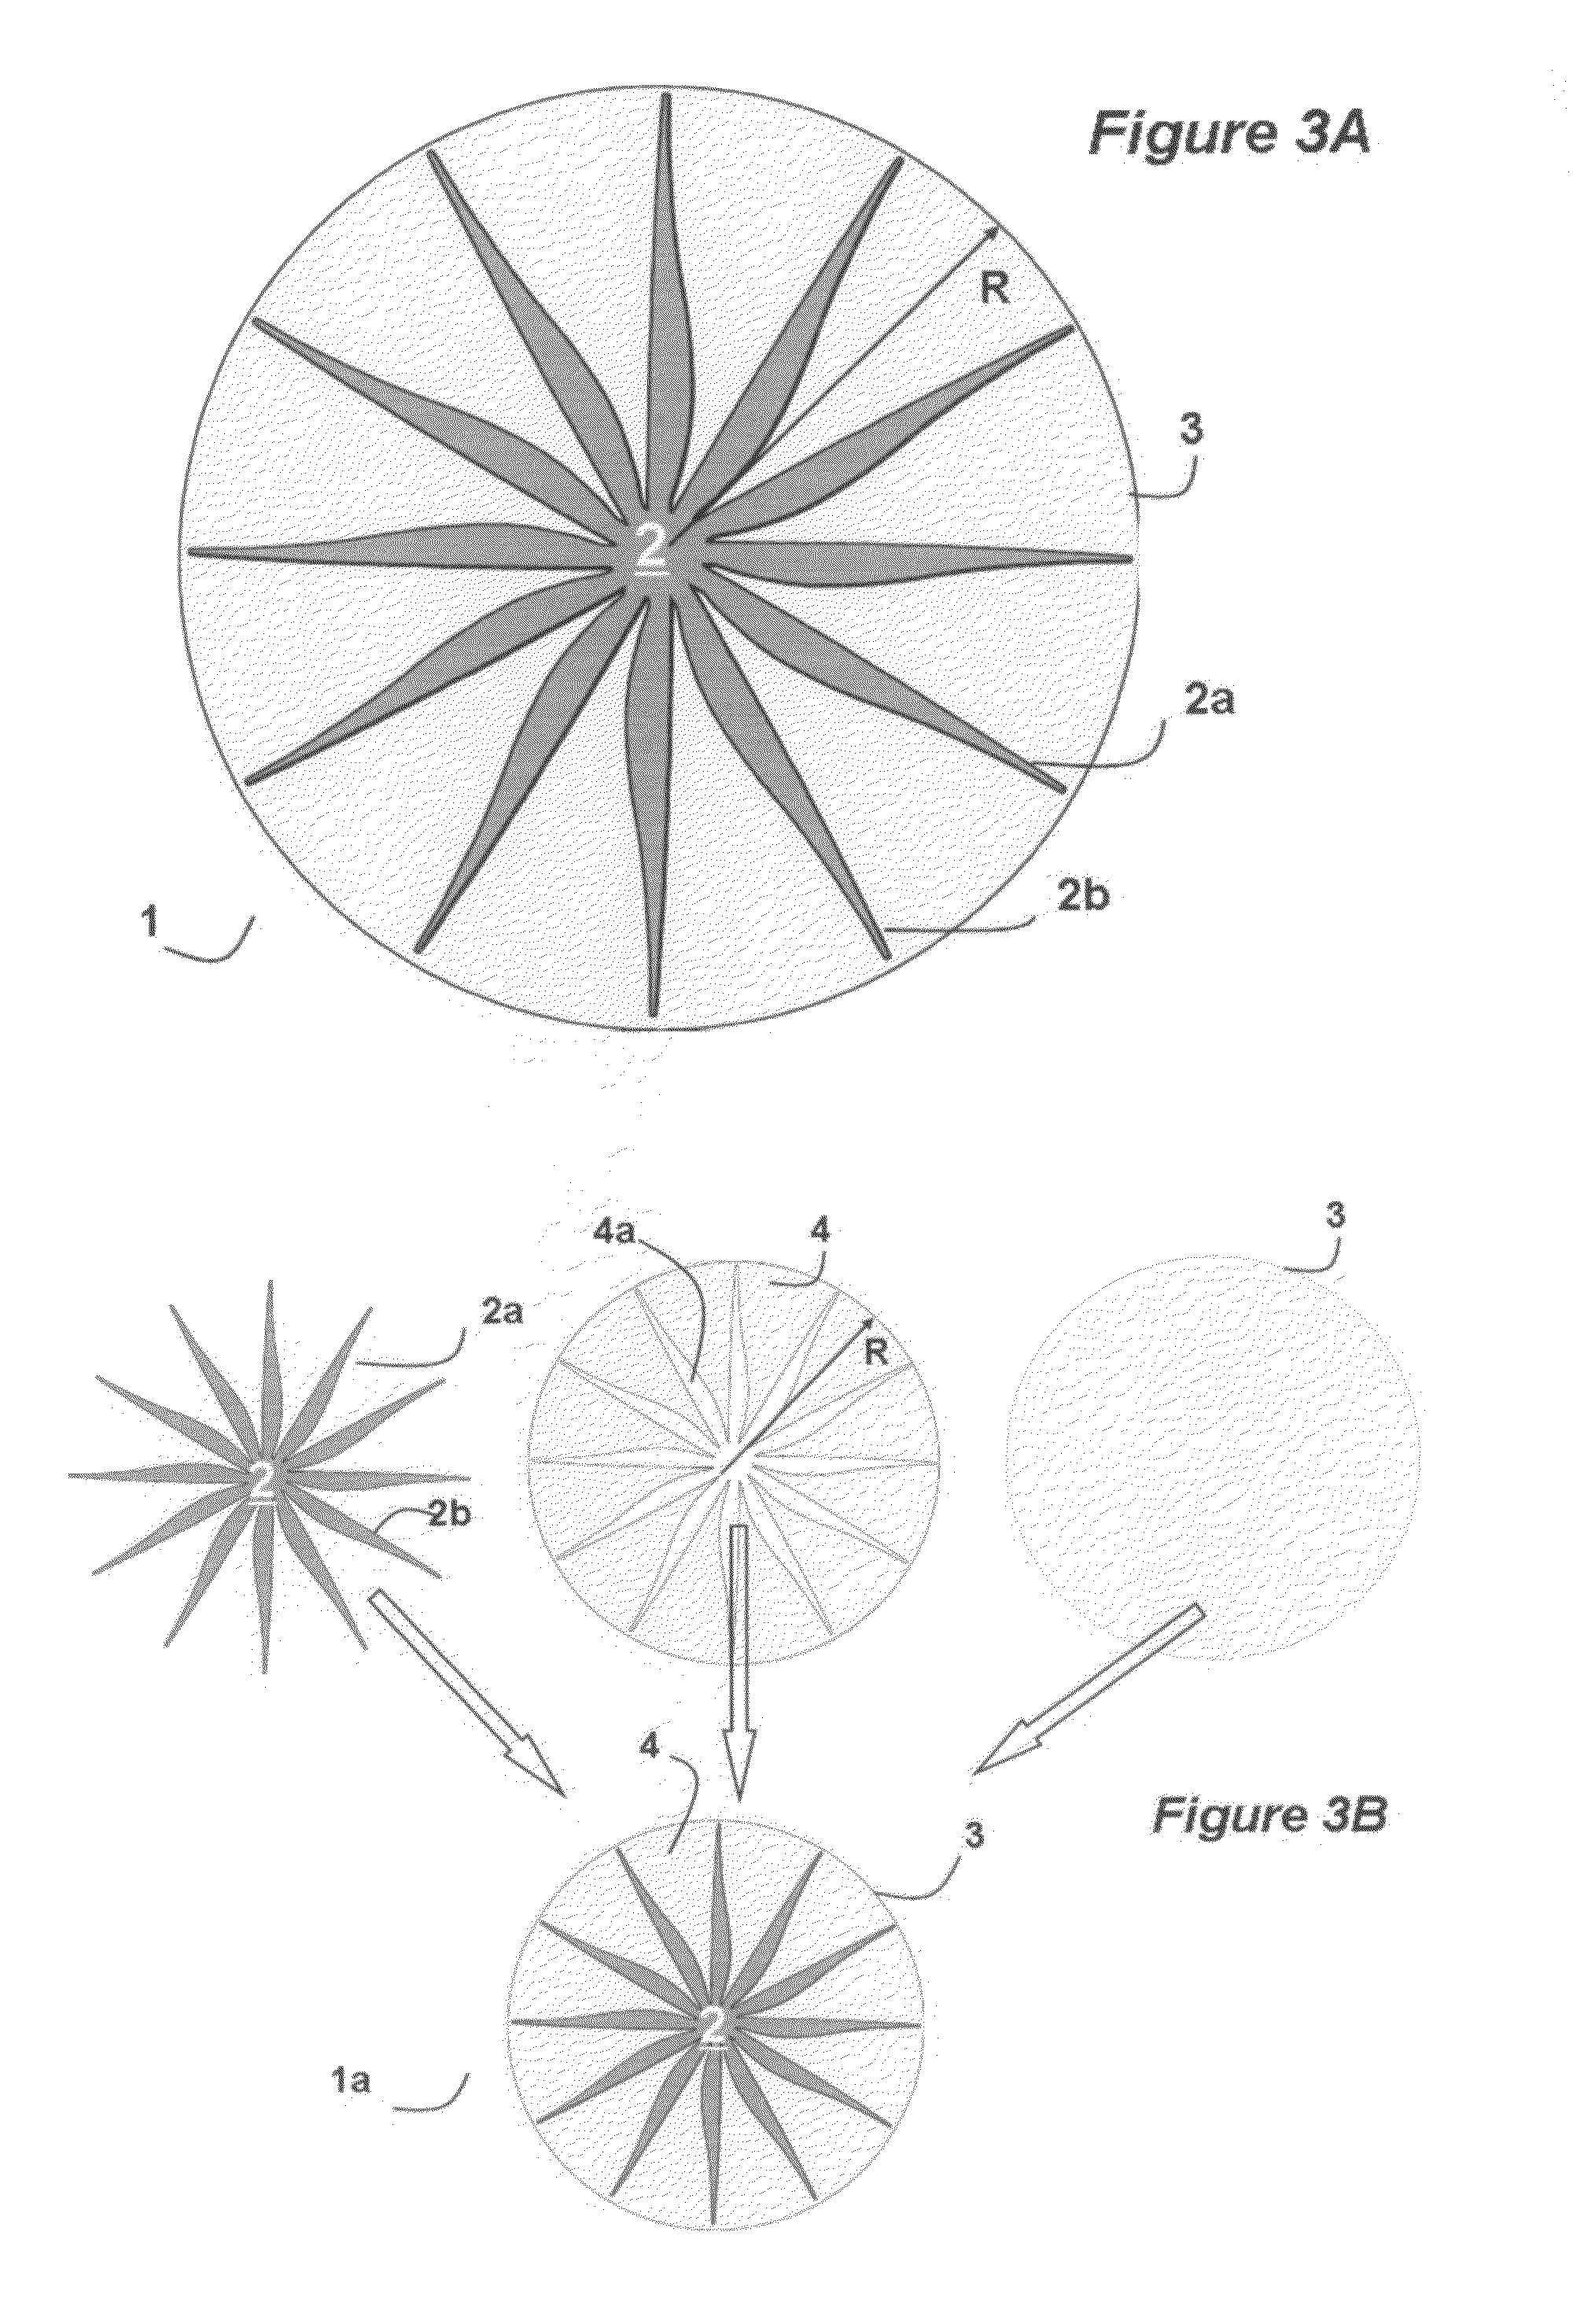 Tool and Method for Rapid Design and Reduction of Rotor Mass